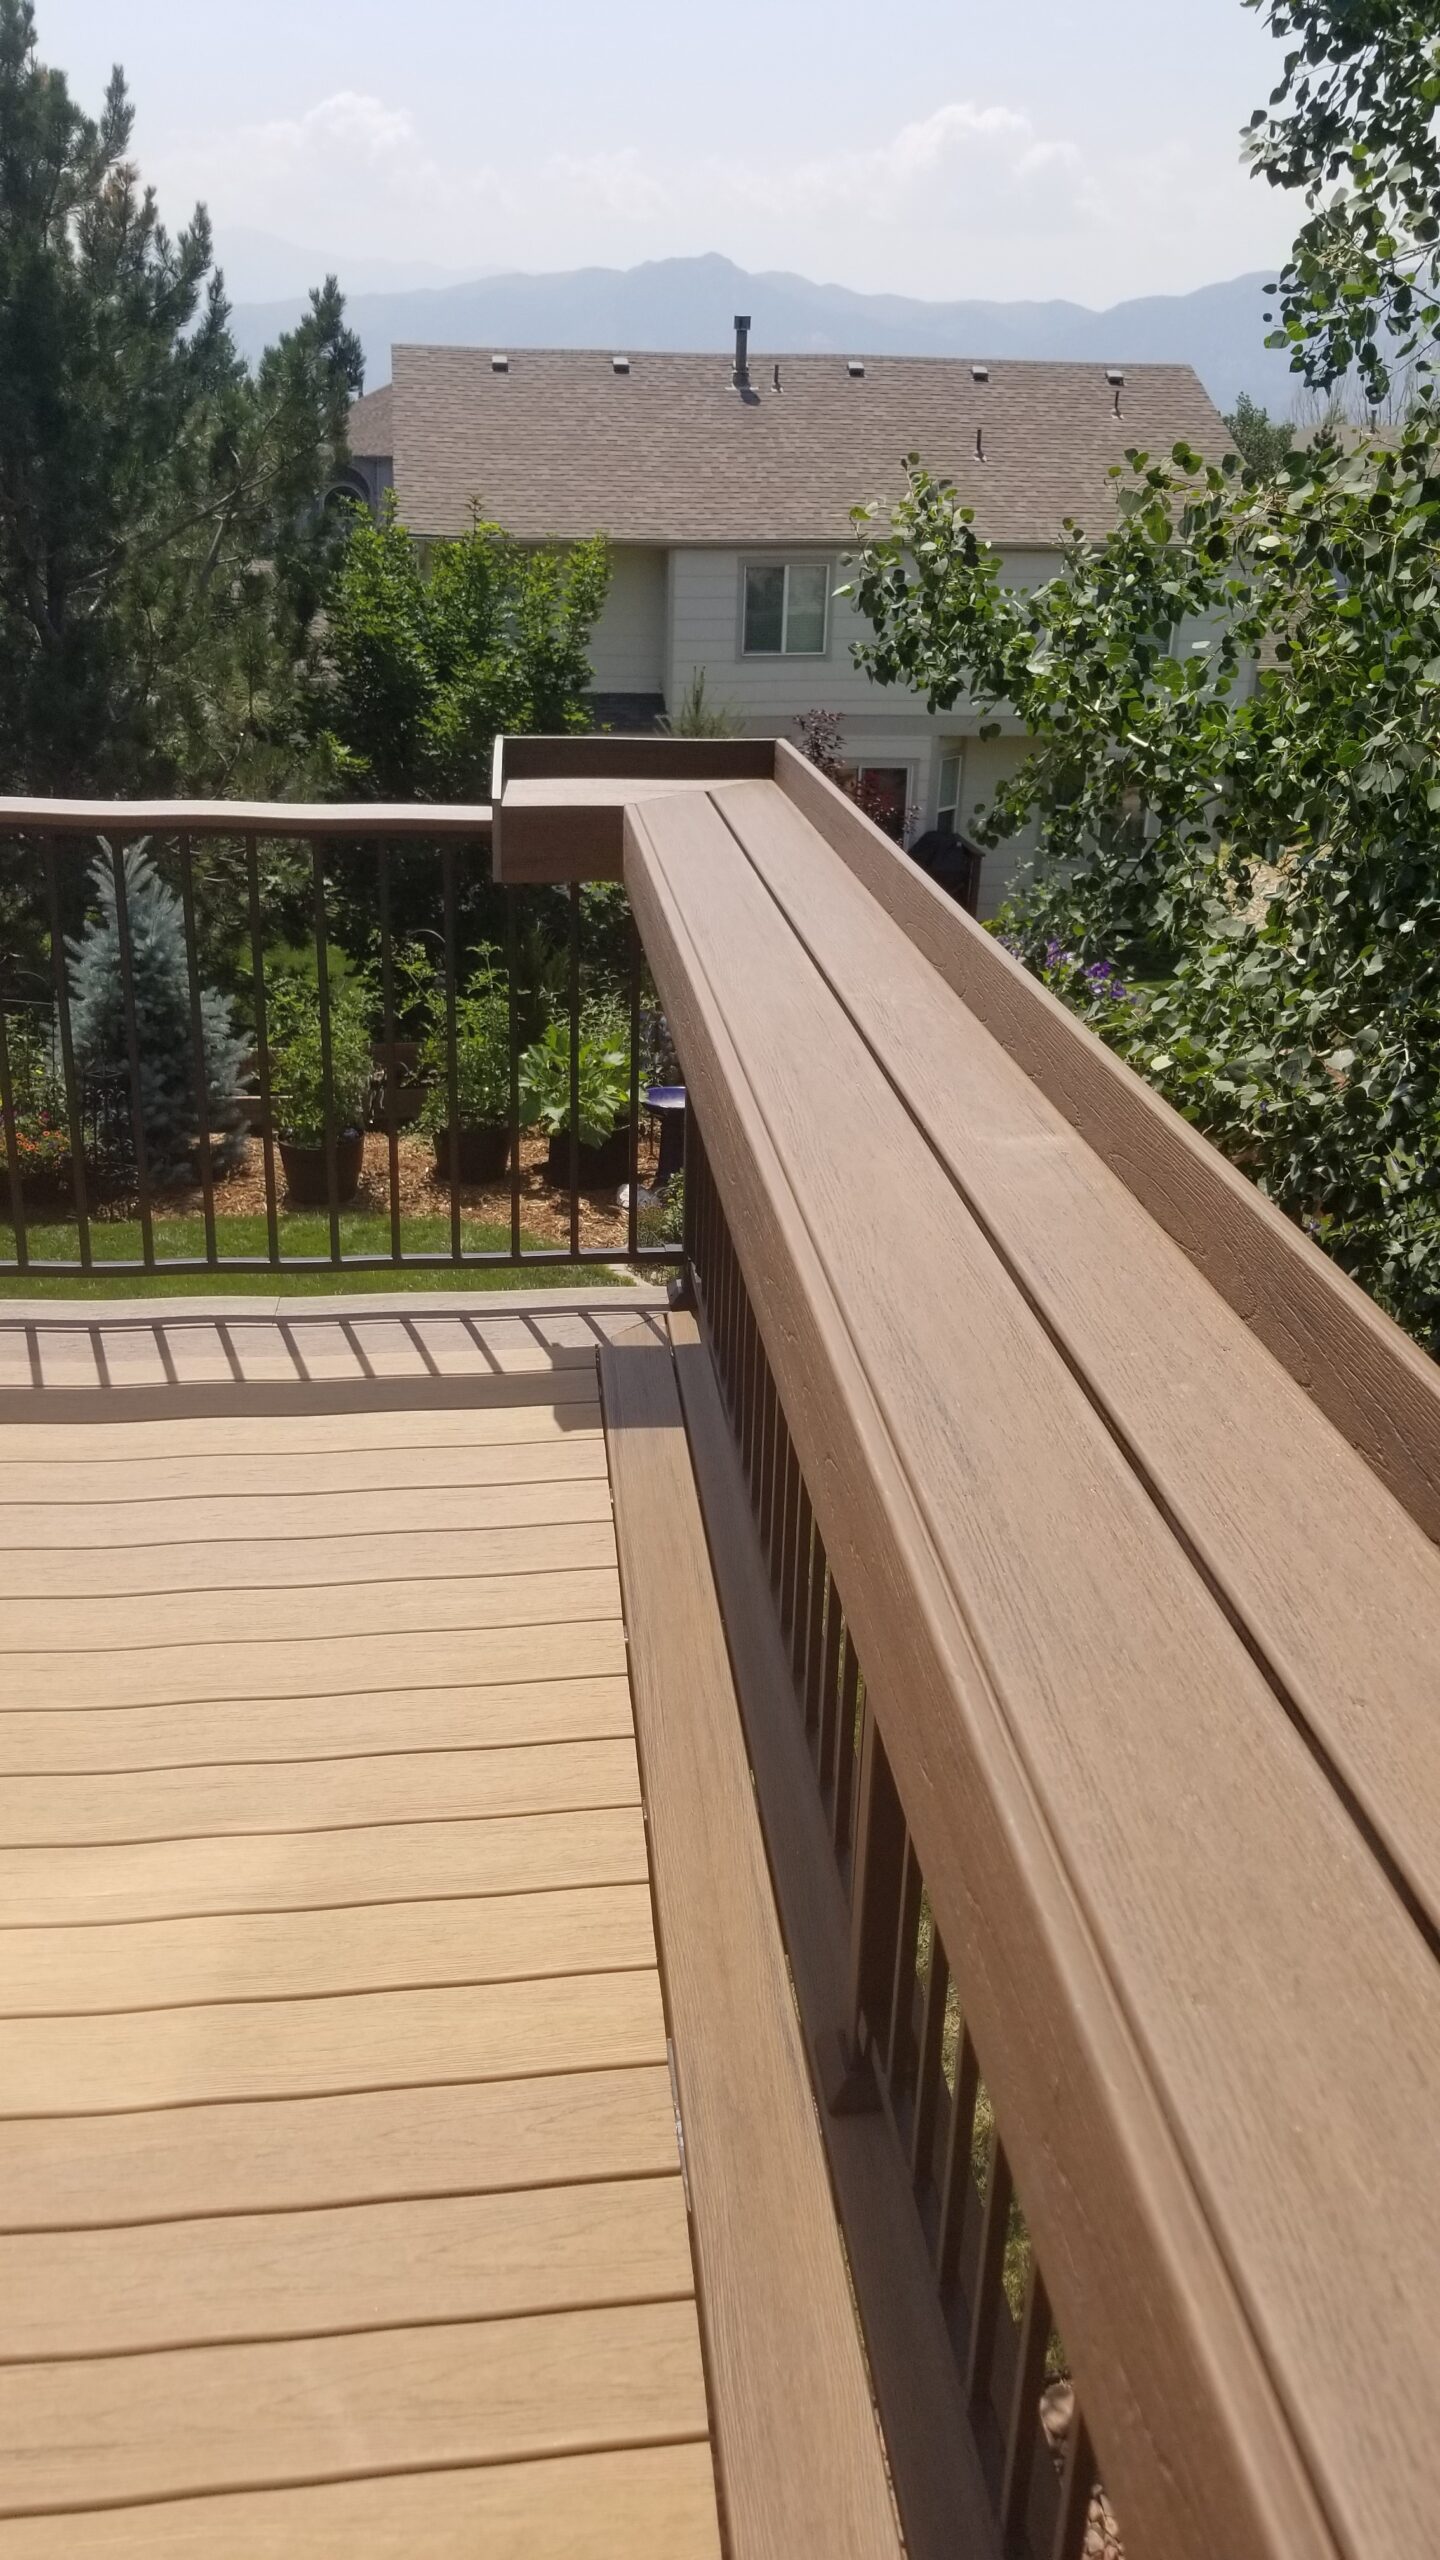 Custom designed and built dining rail, it is built on top of the deck railing